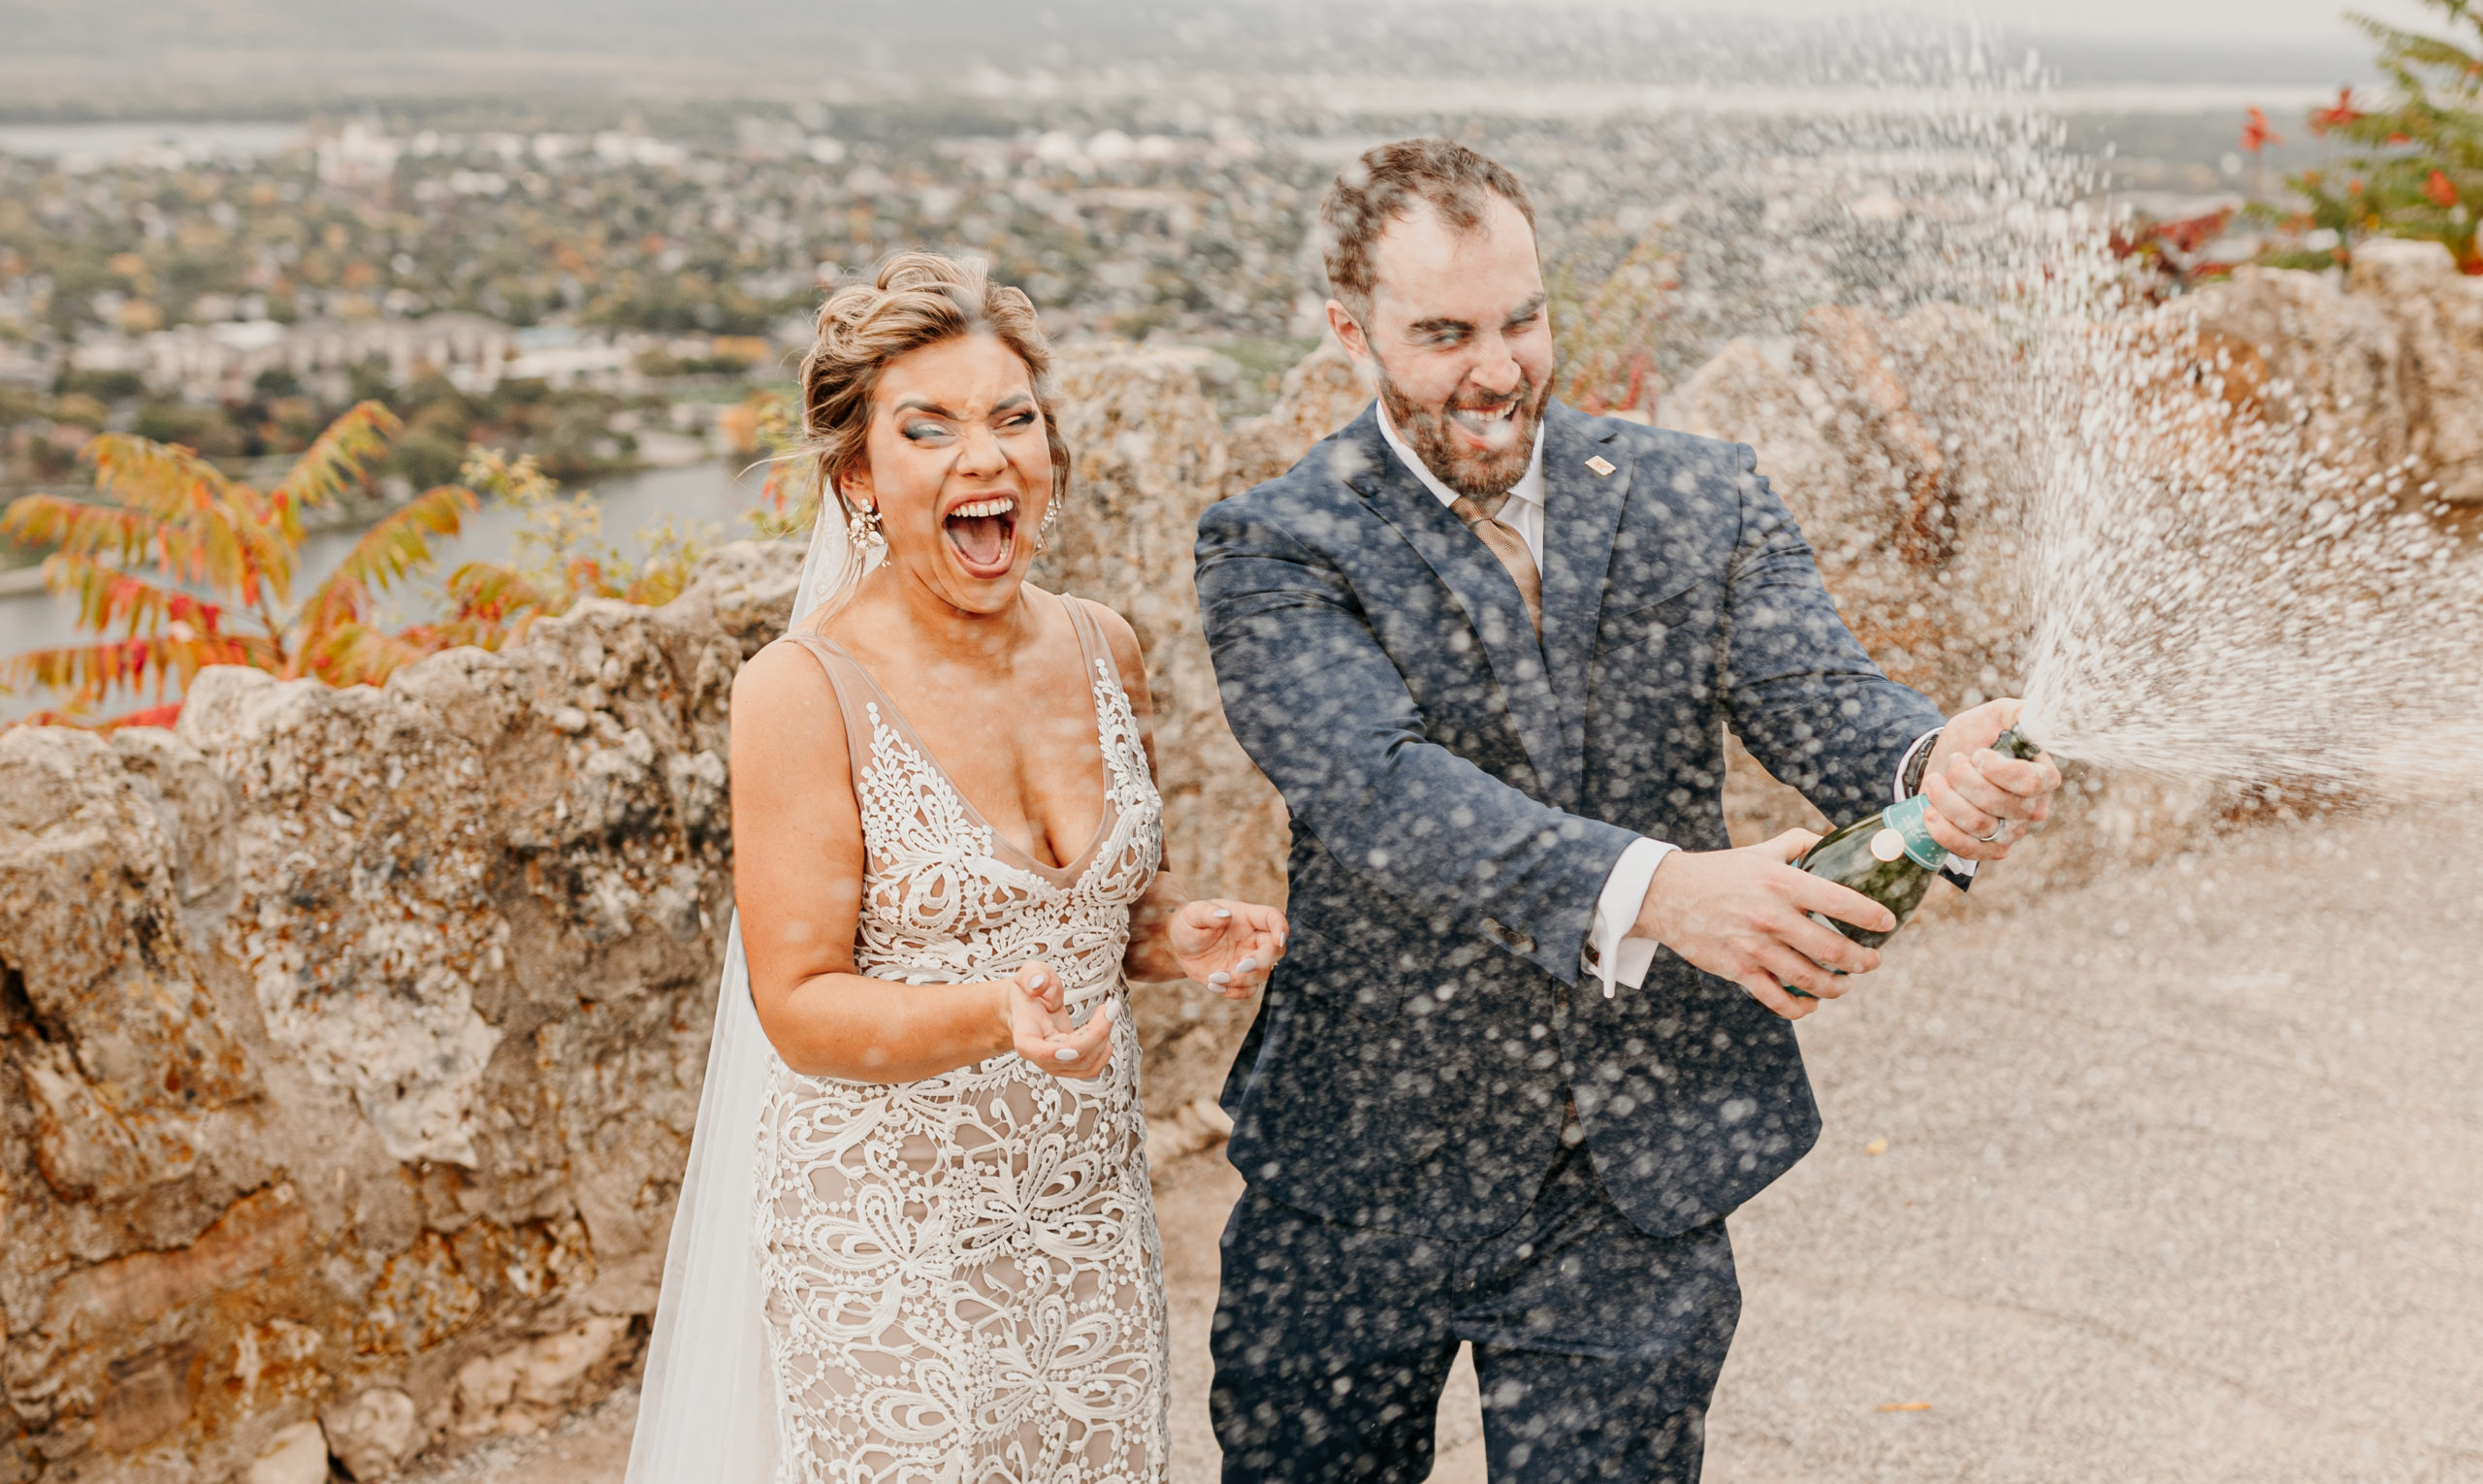 Bride and groom popping champagne on their wedding day